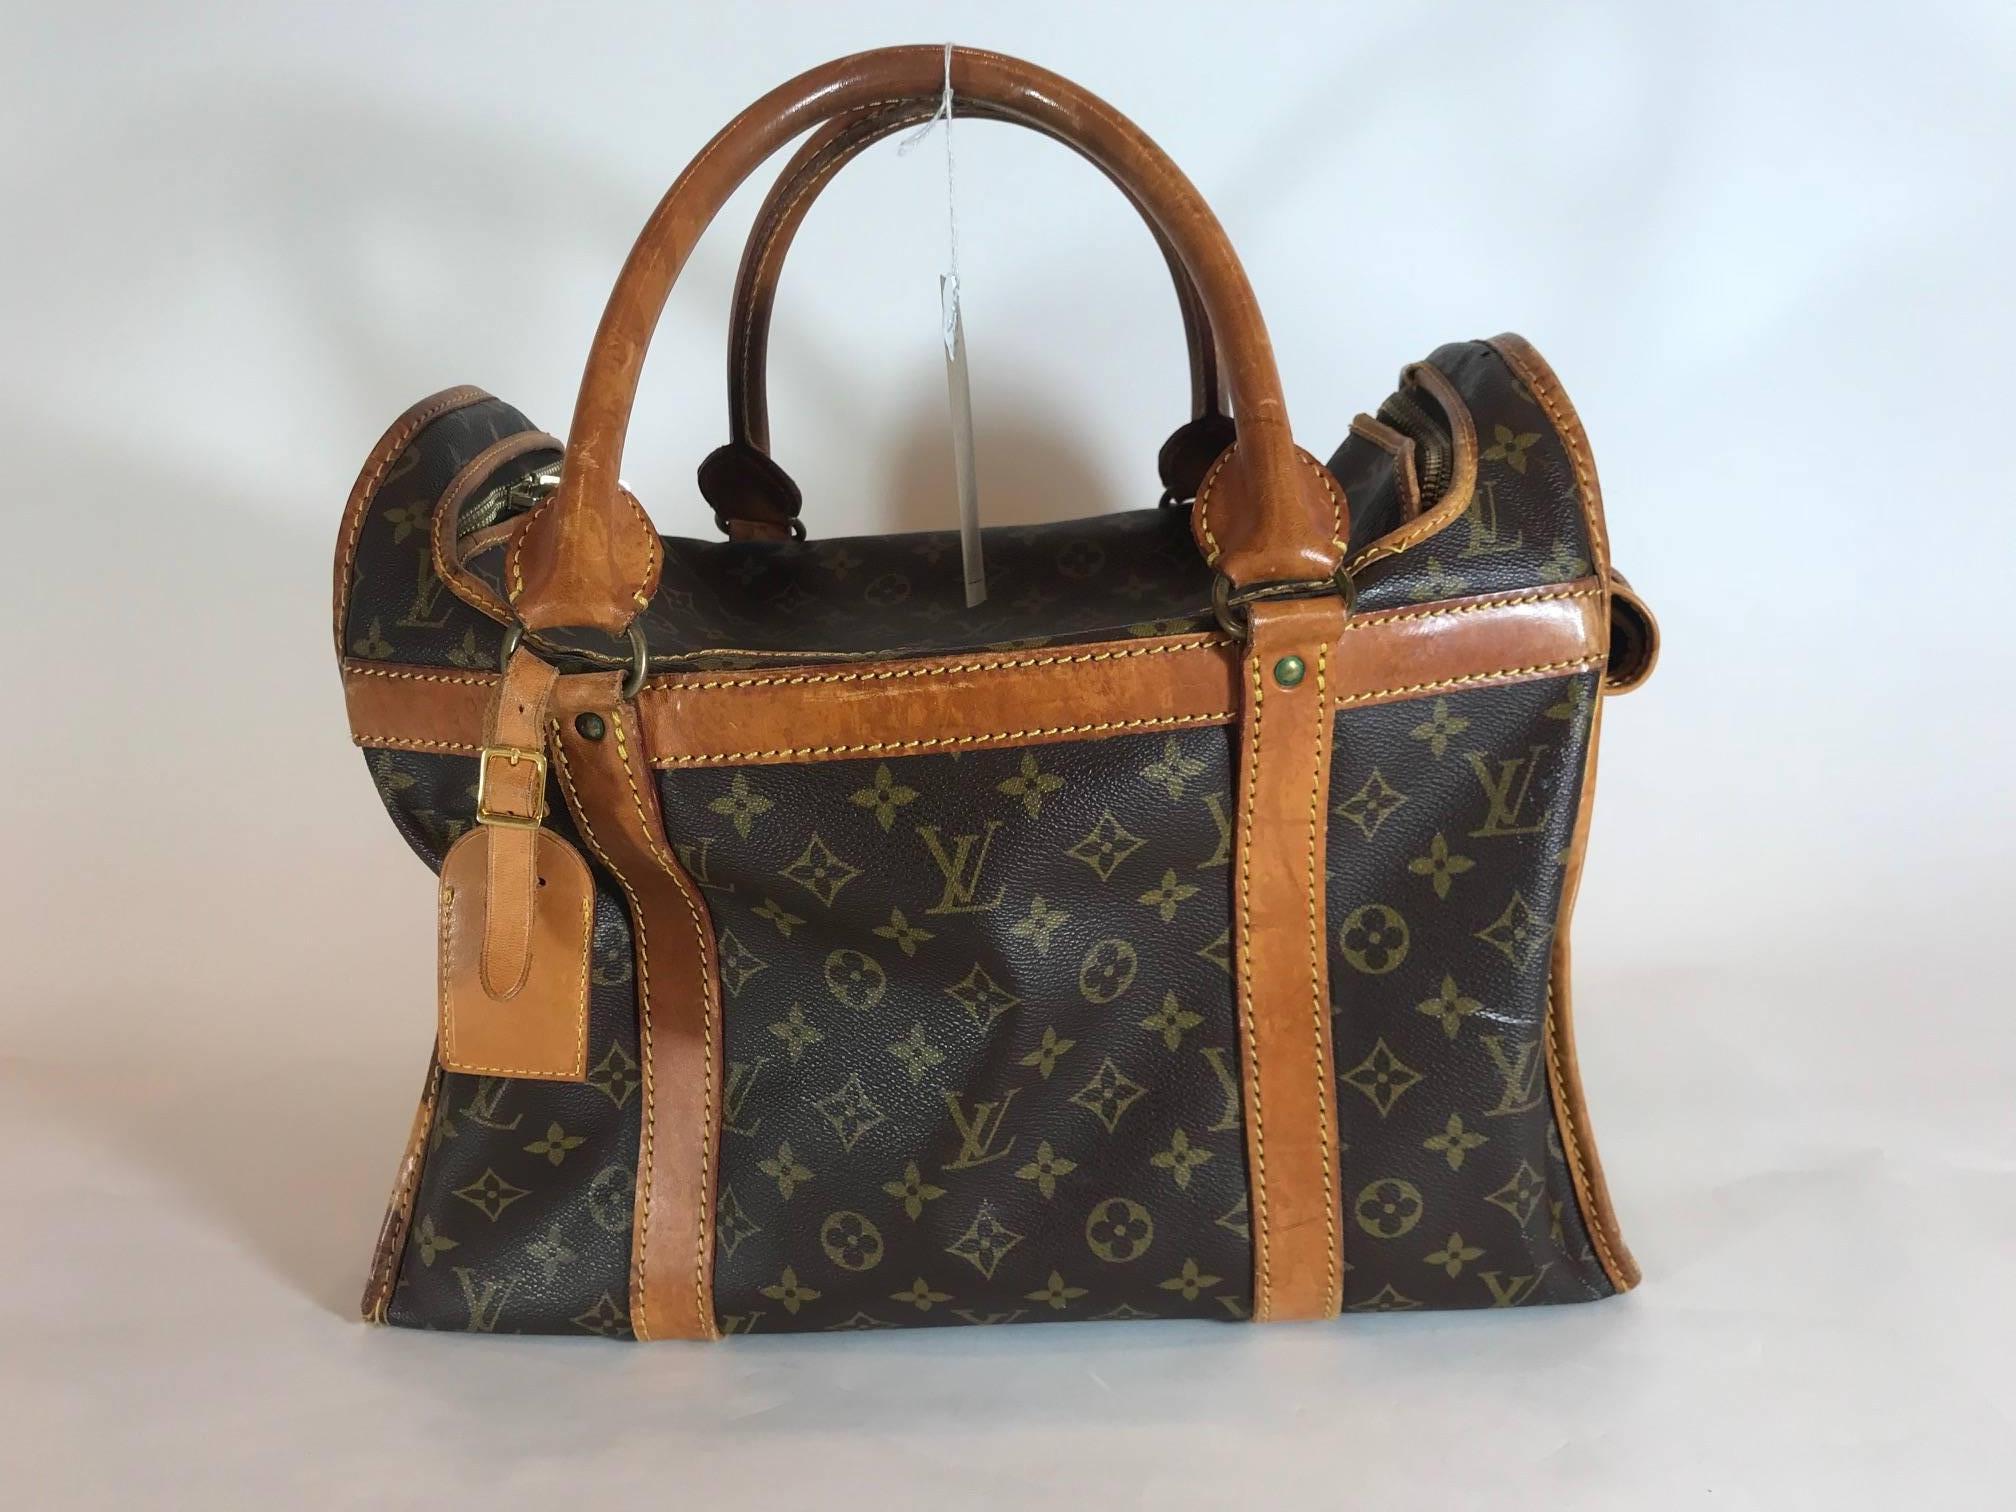 Signature monogram canvas featuring  natural cowhide leather trims. Gold-tone hardware. Gold-tone breathable mesh window. Dual top rolled handles. Roll-up flap with snap fastener. Top-zip around closure. Water-resistant brown nylon interior. Lock